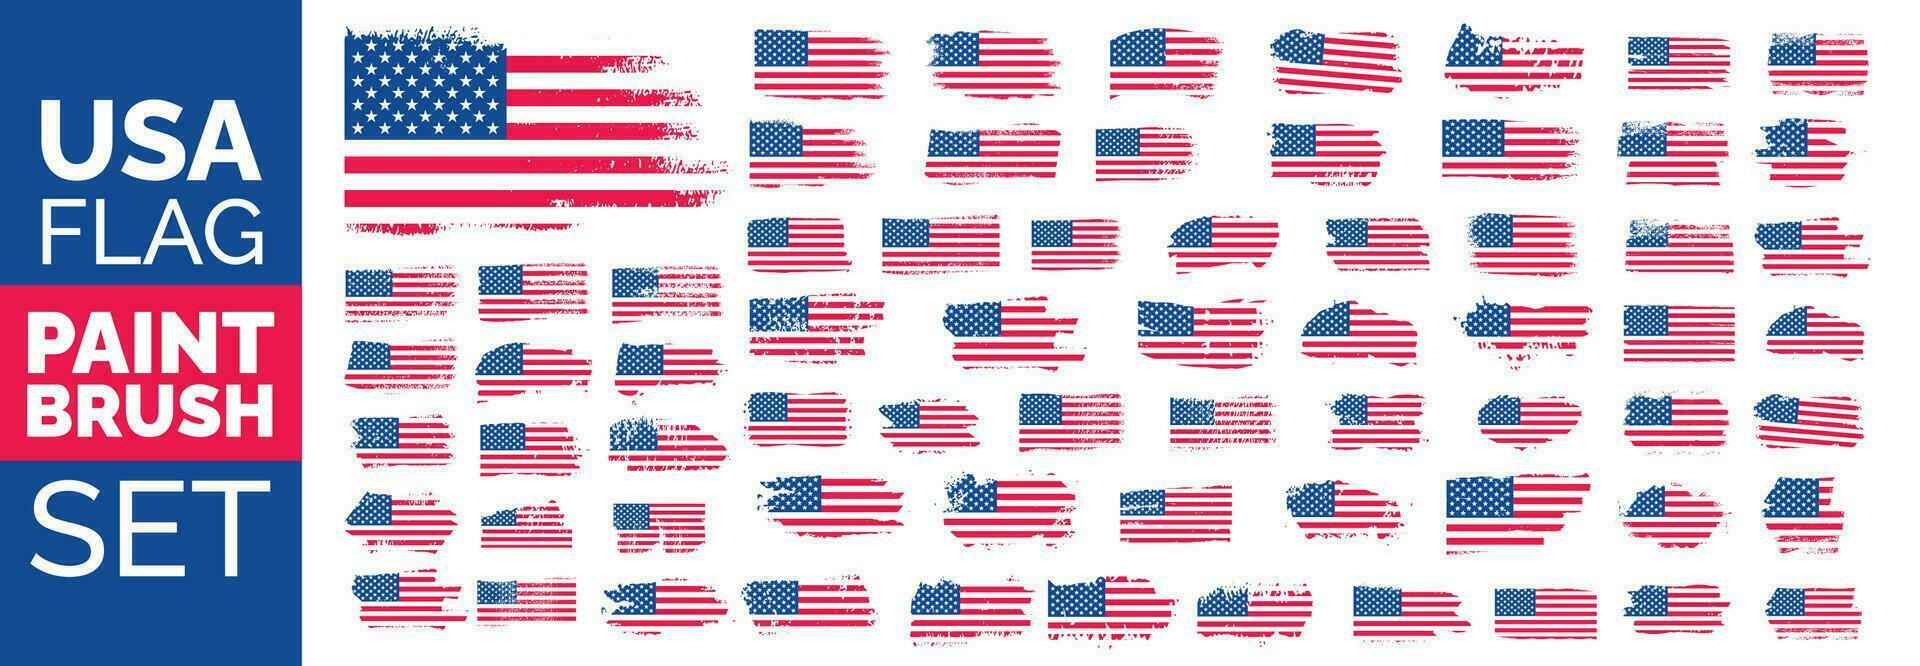 big mega set of Grunge US Flag ink brush stroke effect or United States of America flag with watercolor paint brush strokes texture design. USA flag paint brush texture big mega bundle. vector